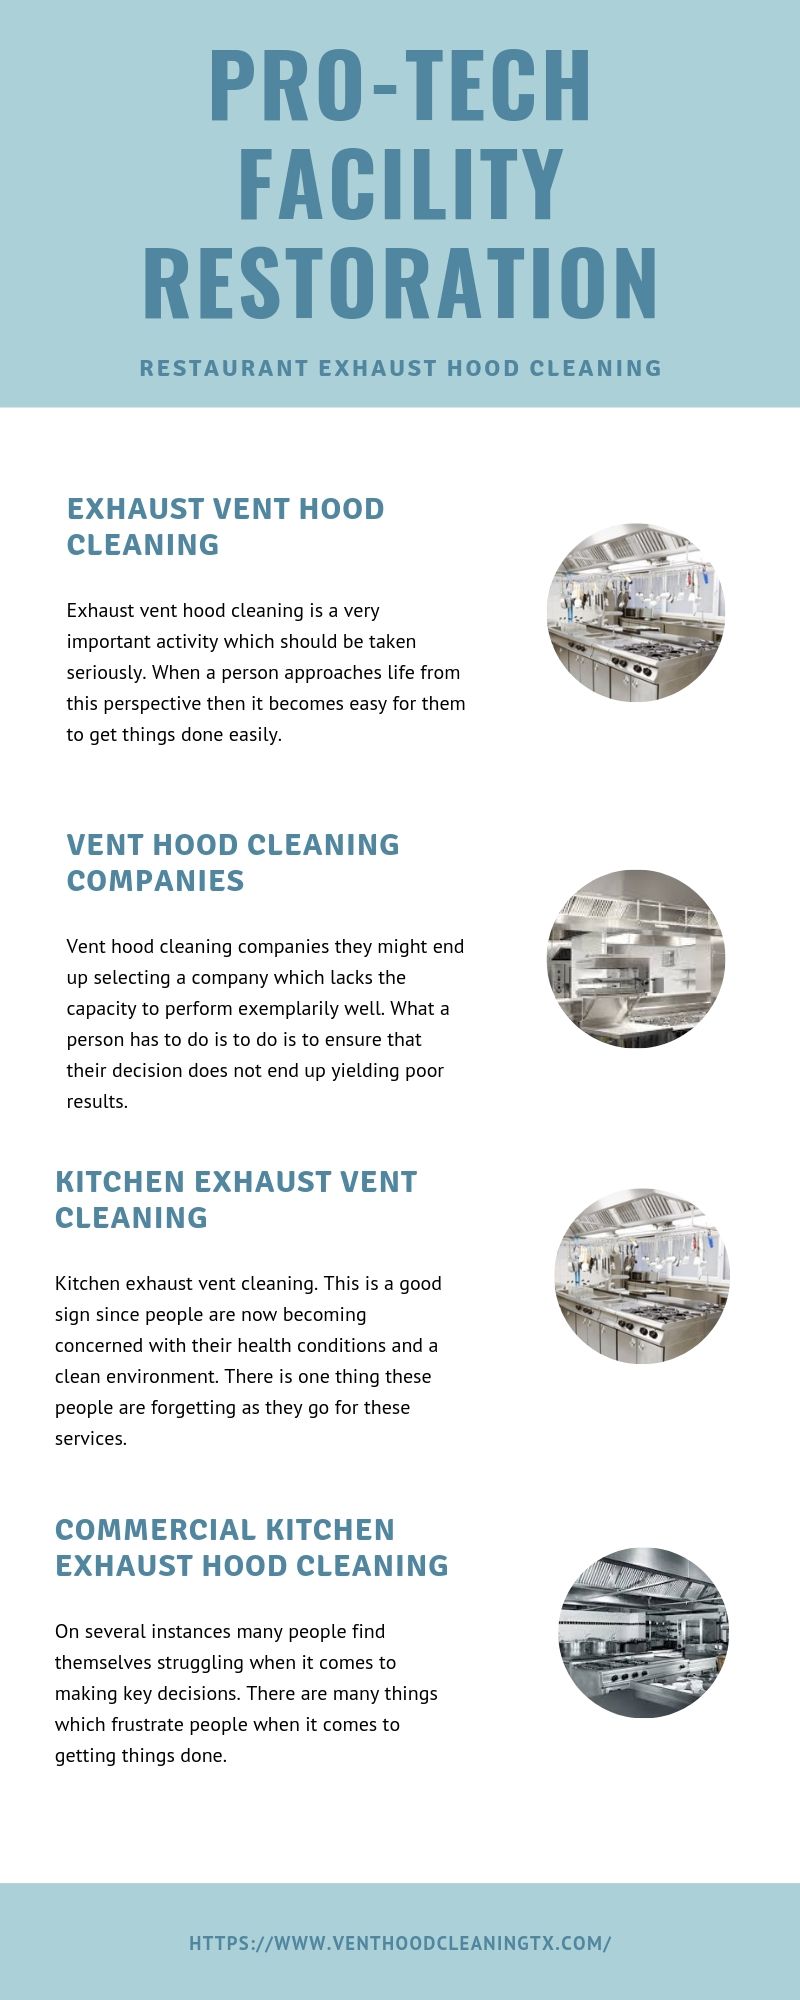 Restaurant Vent Hood Cleaning Houston.jpg  by Venthoodcleaningtx